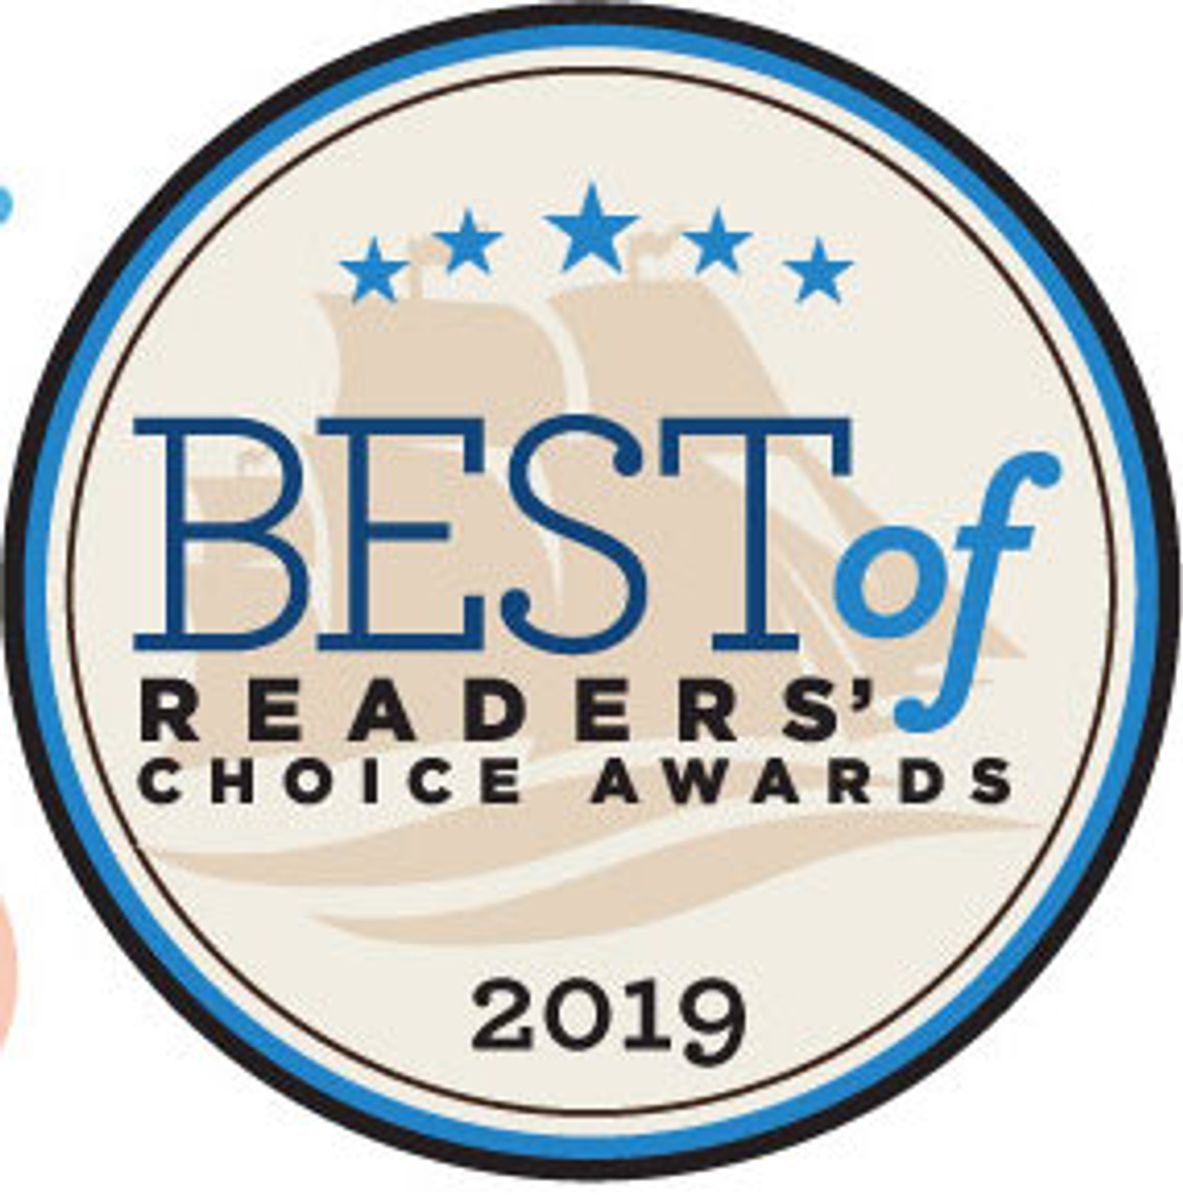 Best of Readers’ Choice Awards